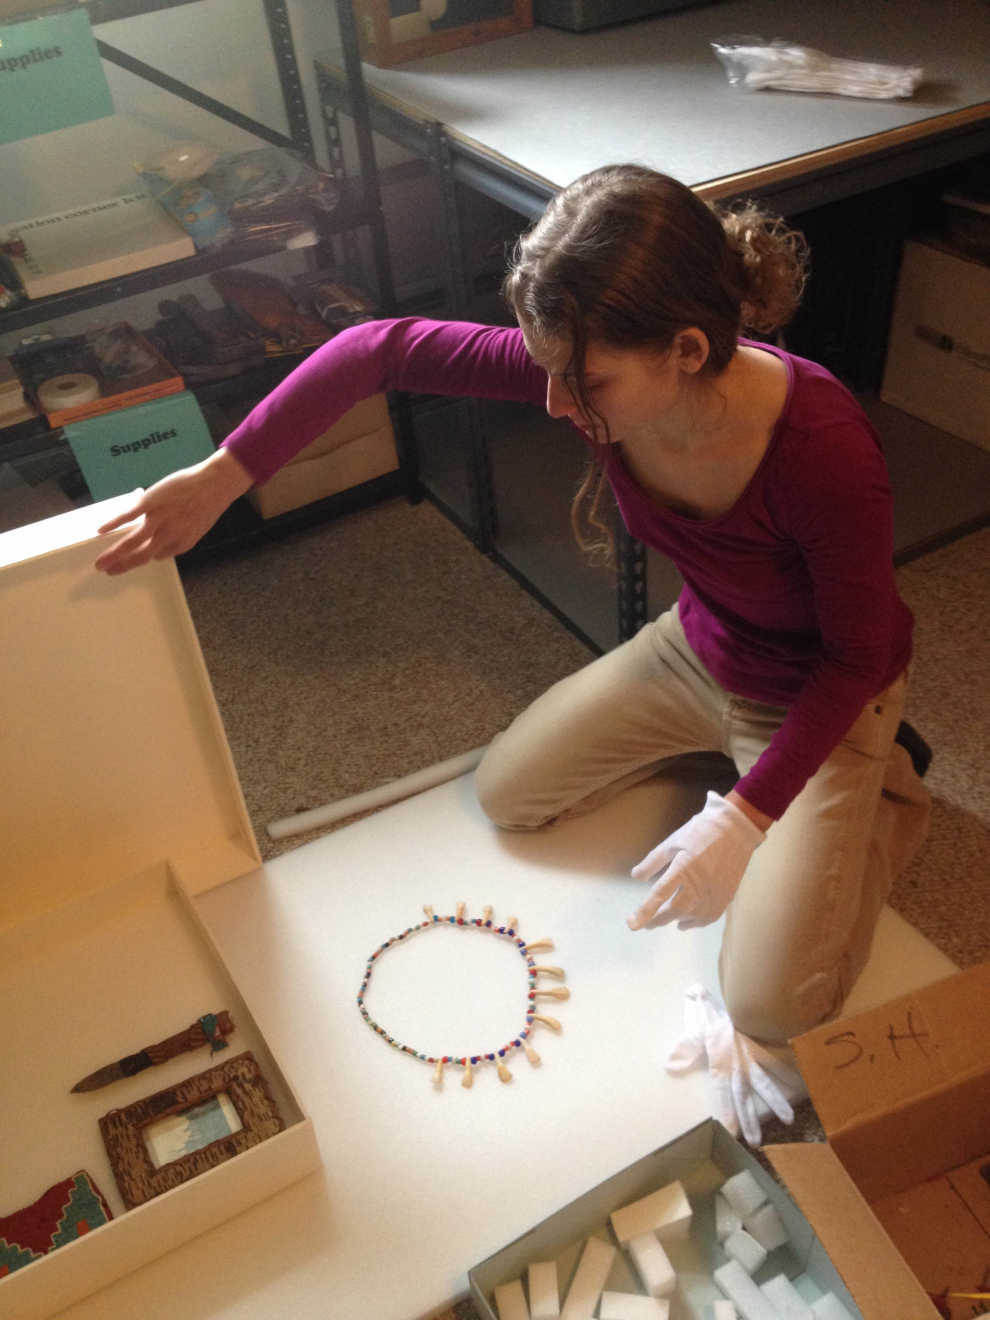 Tomaquag staff member works to inventory and rehouse items in the collections. Photo courtesy of Tomaquag Museum.